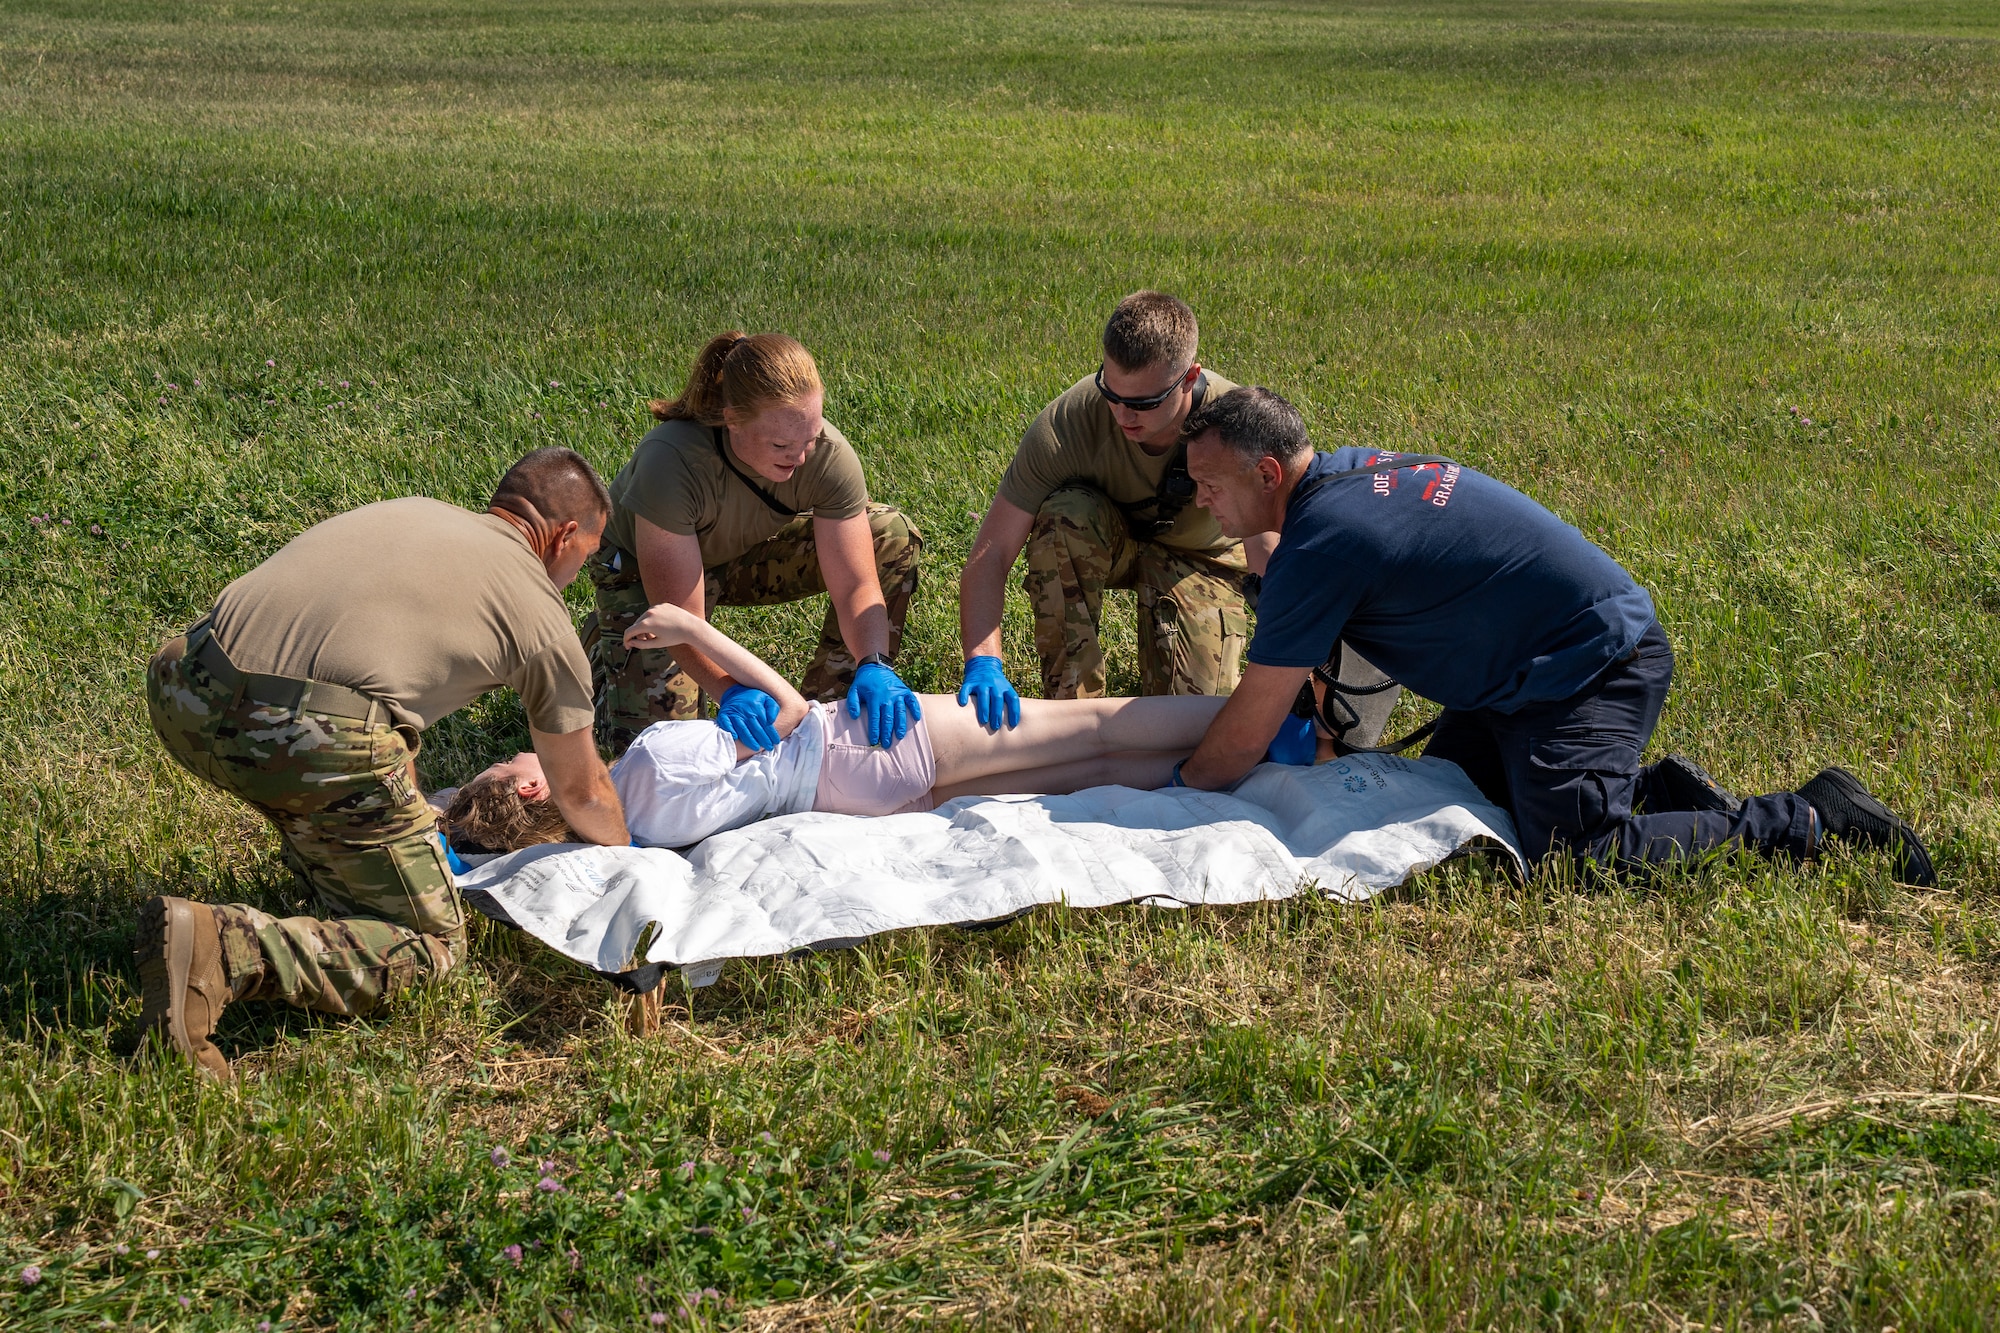 The goal of the exercise was to ensure efficient coordination between all responding agencies in the event of a large-scale incident during the 2023 Sioux Falls Airshow.